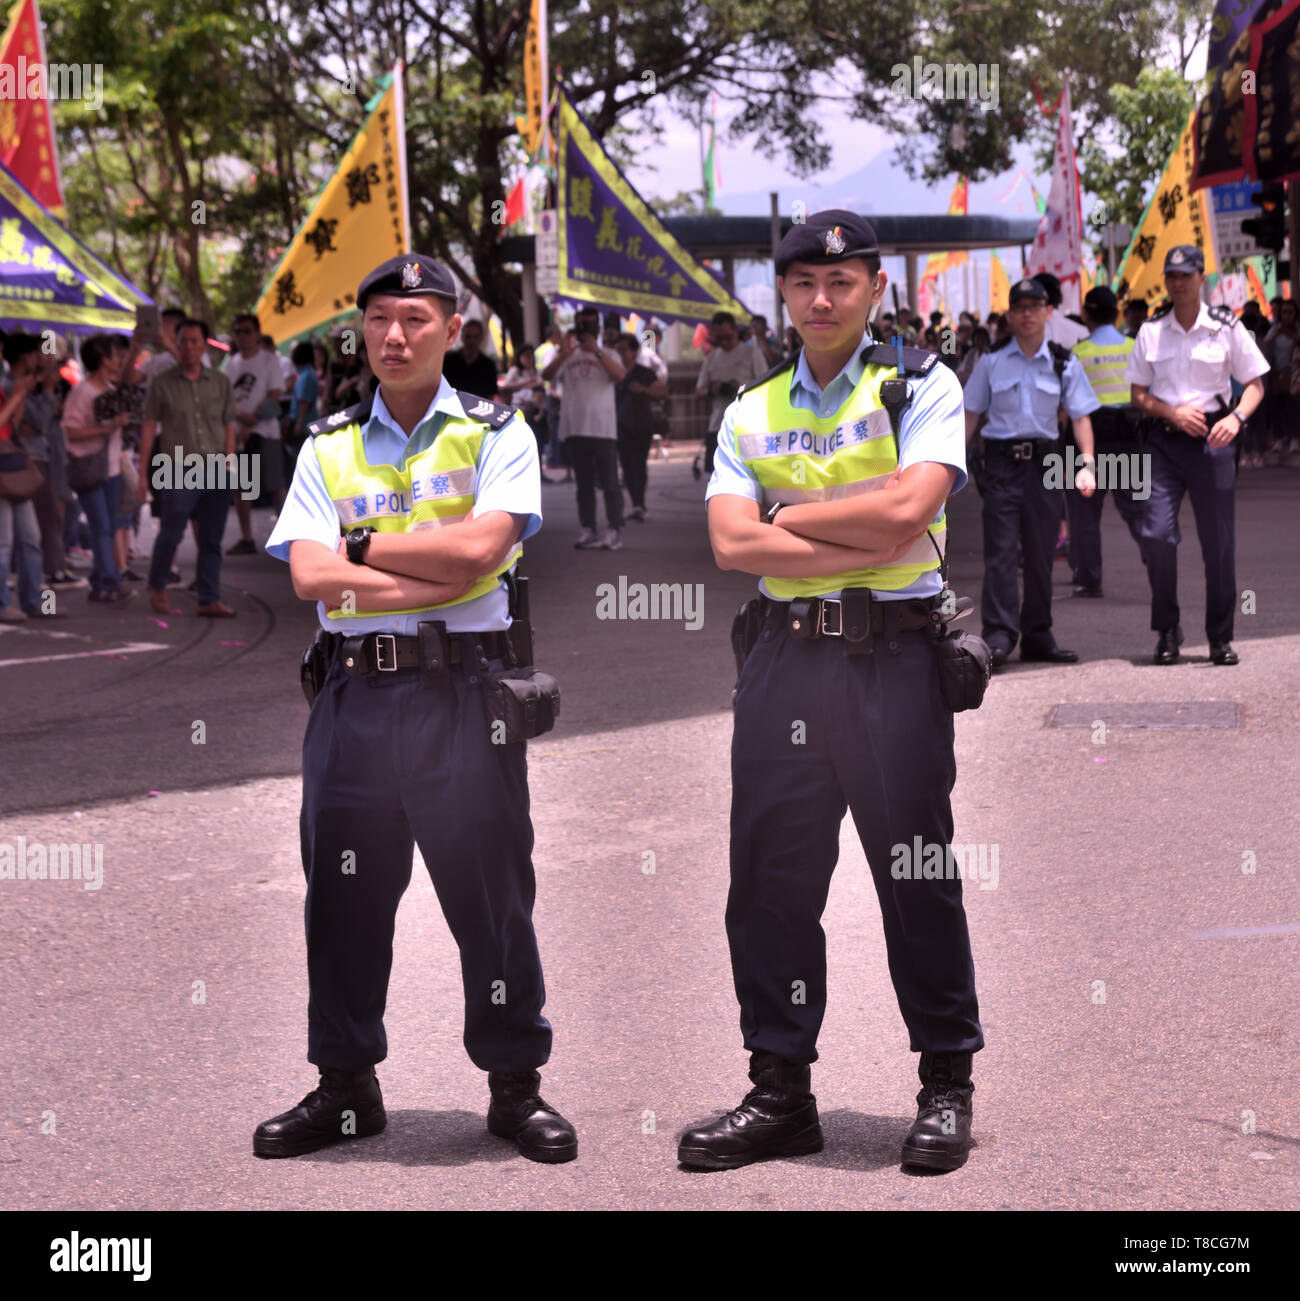 Tactical Unit Police officers watching celebration activities held on street, Hong Kong Stock Photo